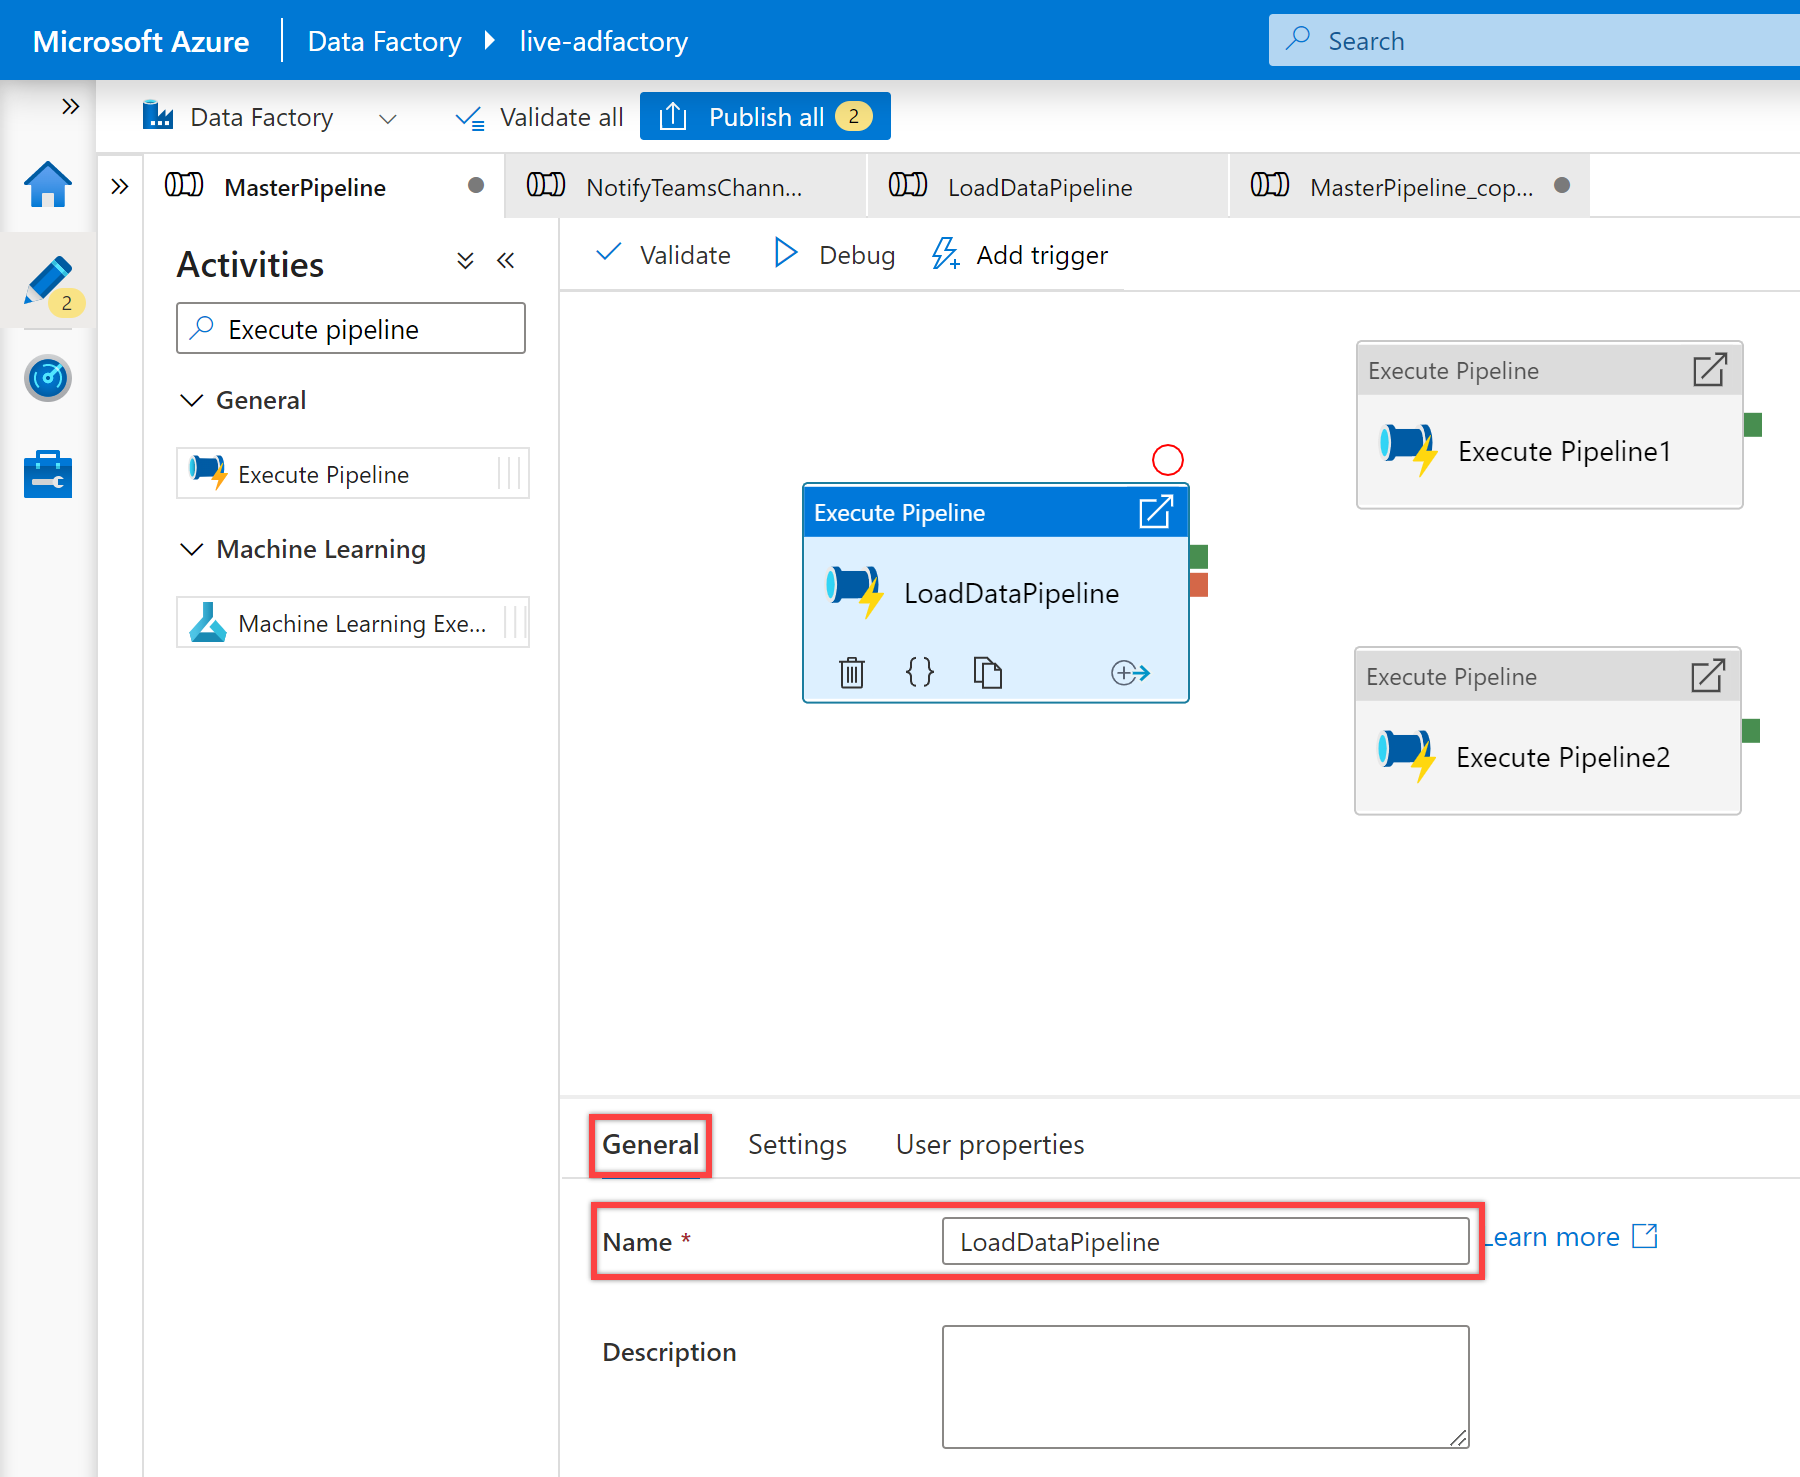 Shows the "Execute pipeline" activity general pane for "LoadDataPipeline" pipeline.